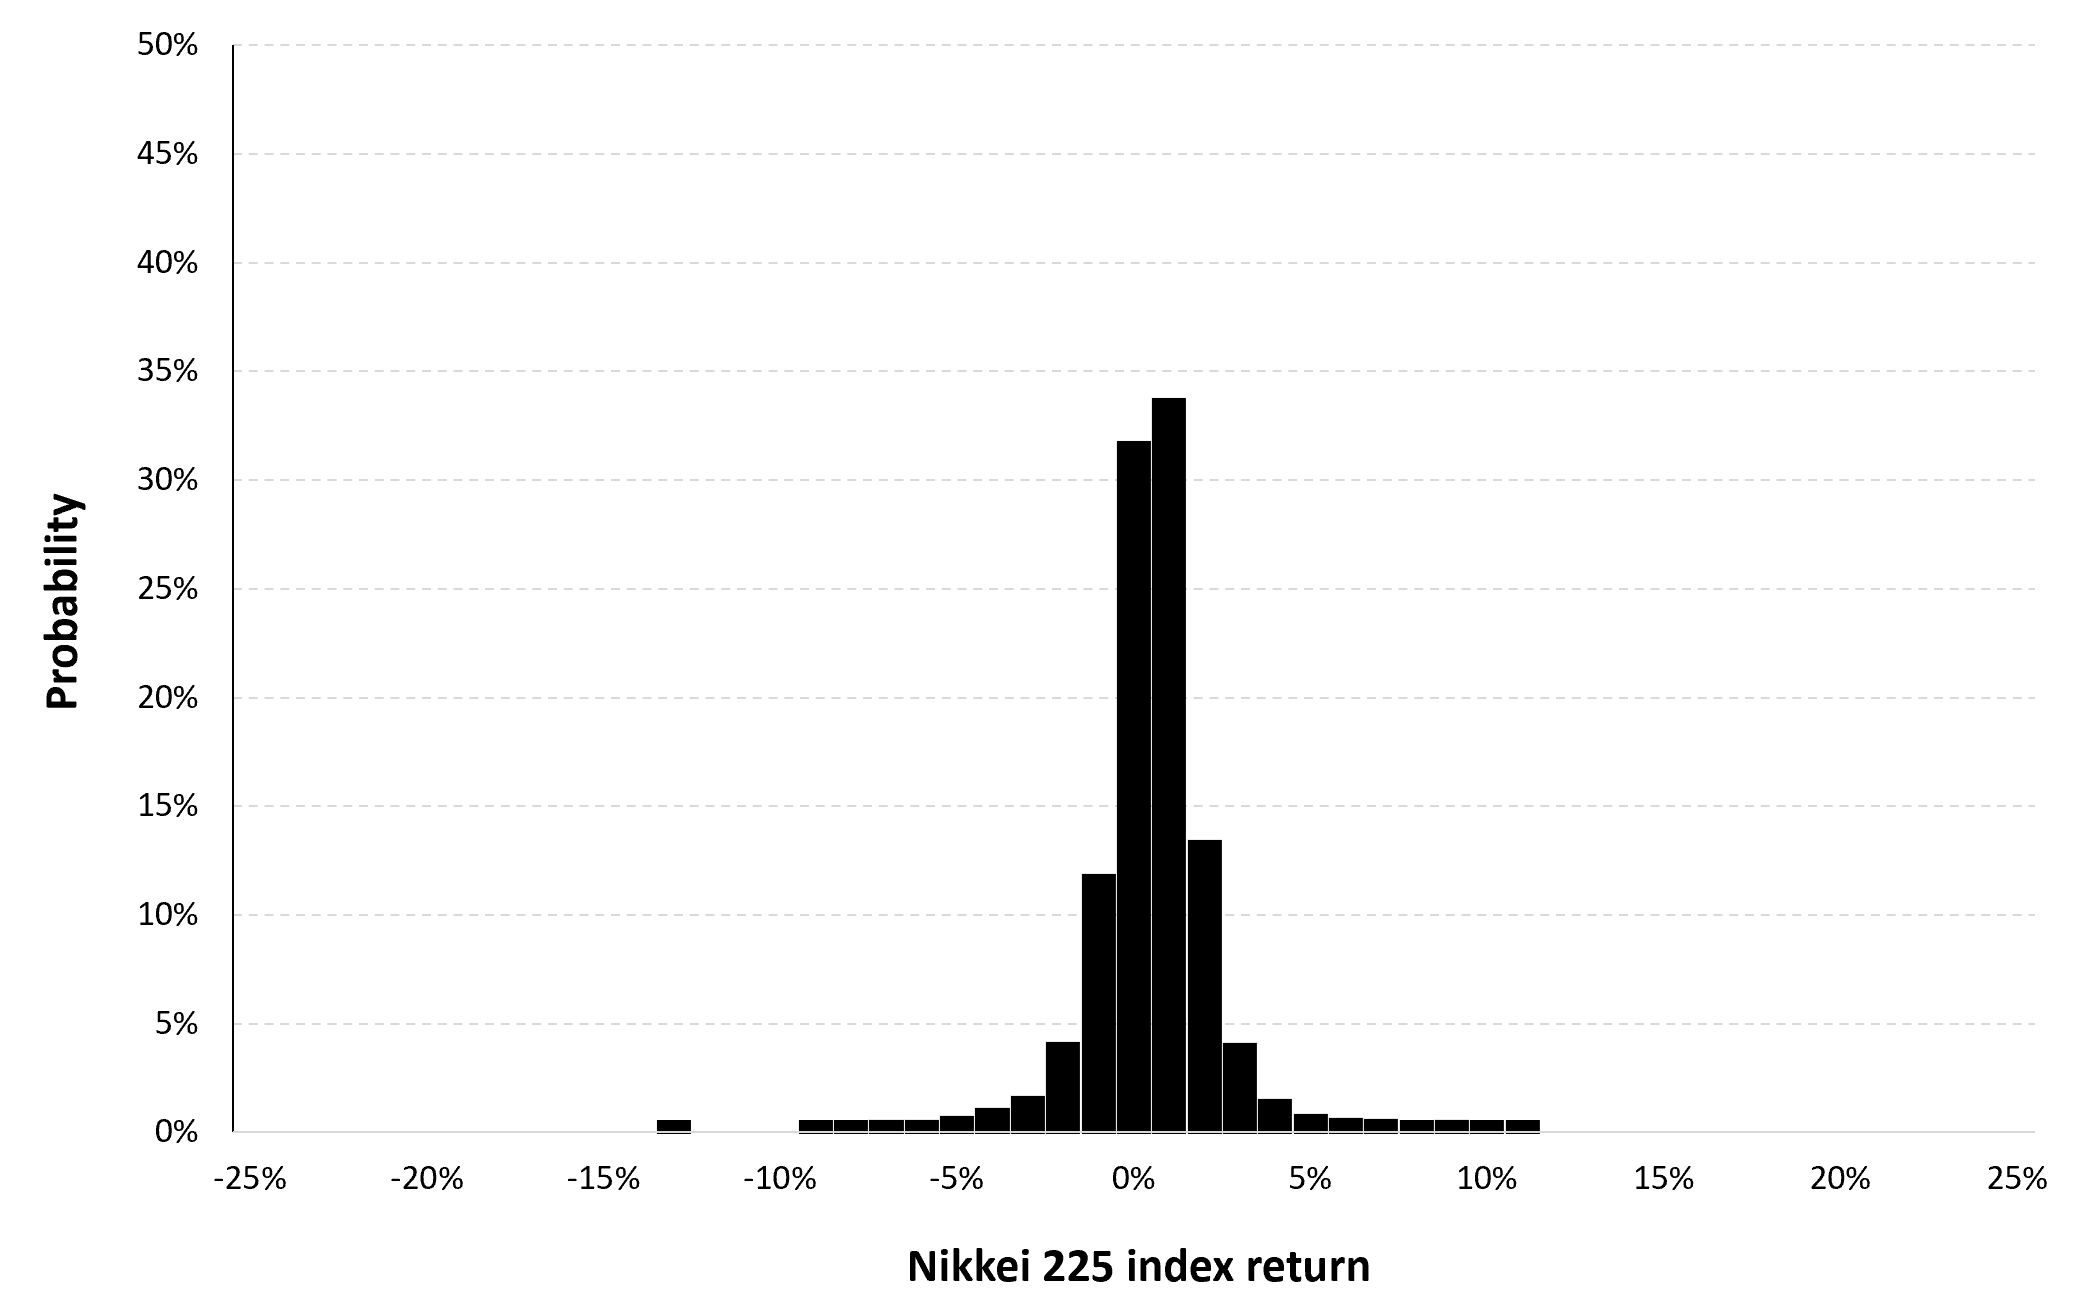 Historical distribution of the daily Nikkei 225 index returns